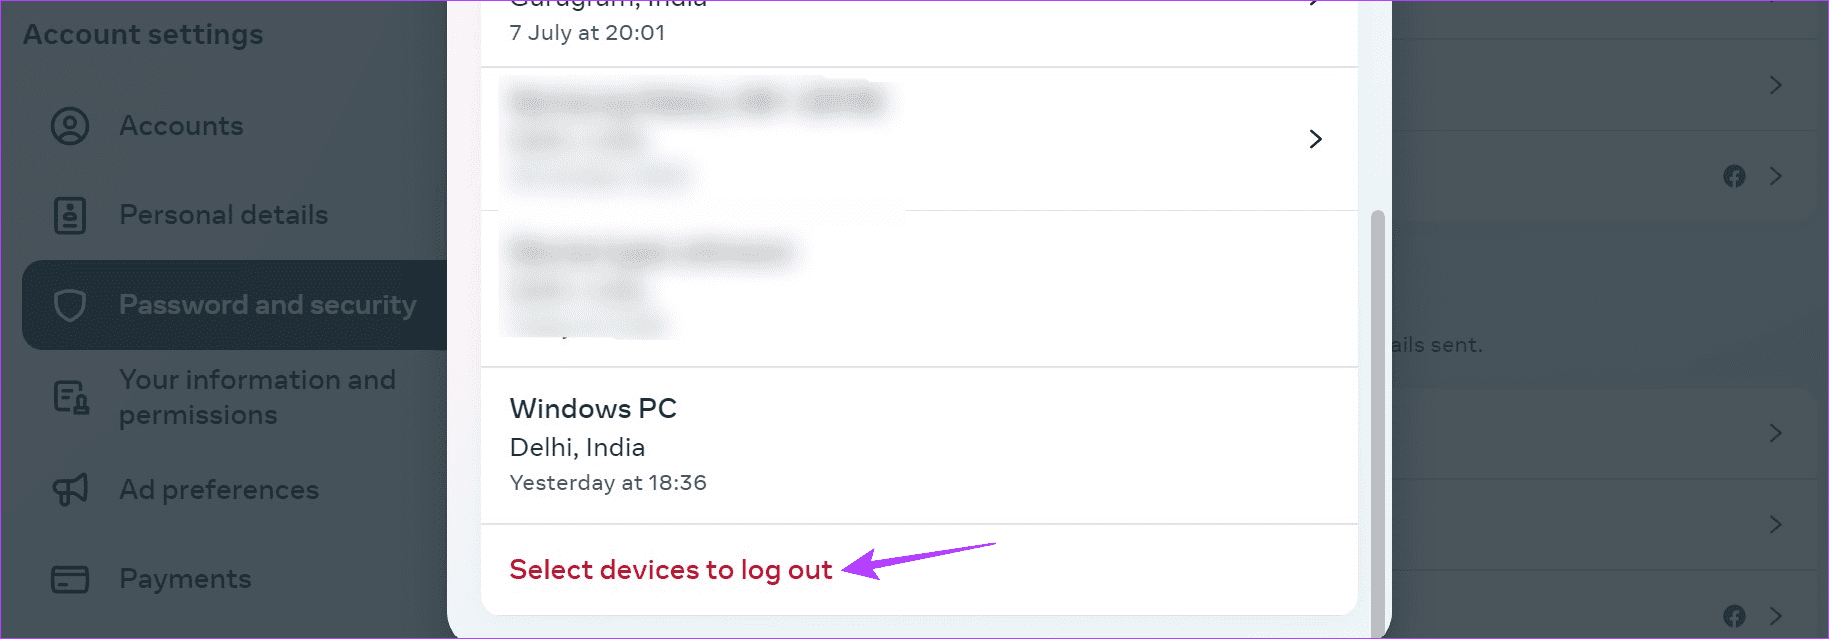 Select device to log out on Facebook